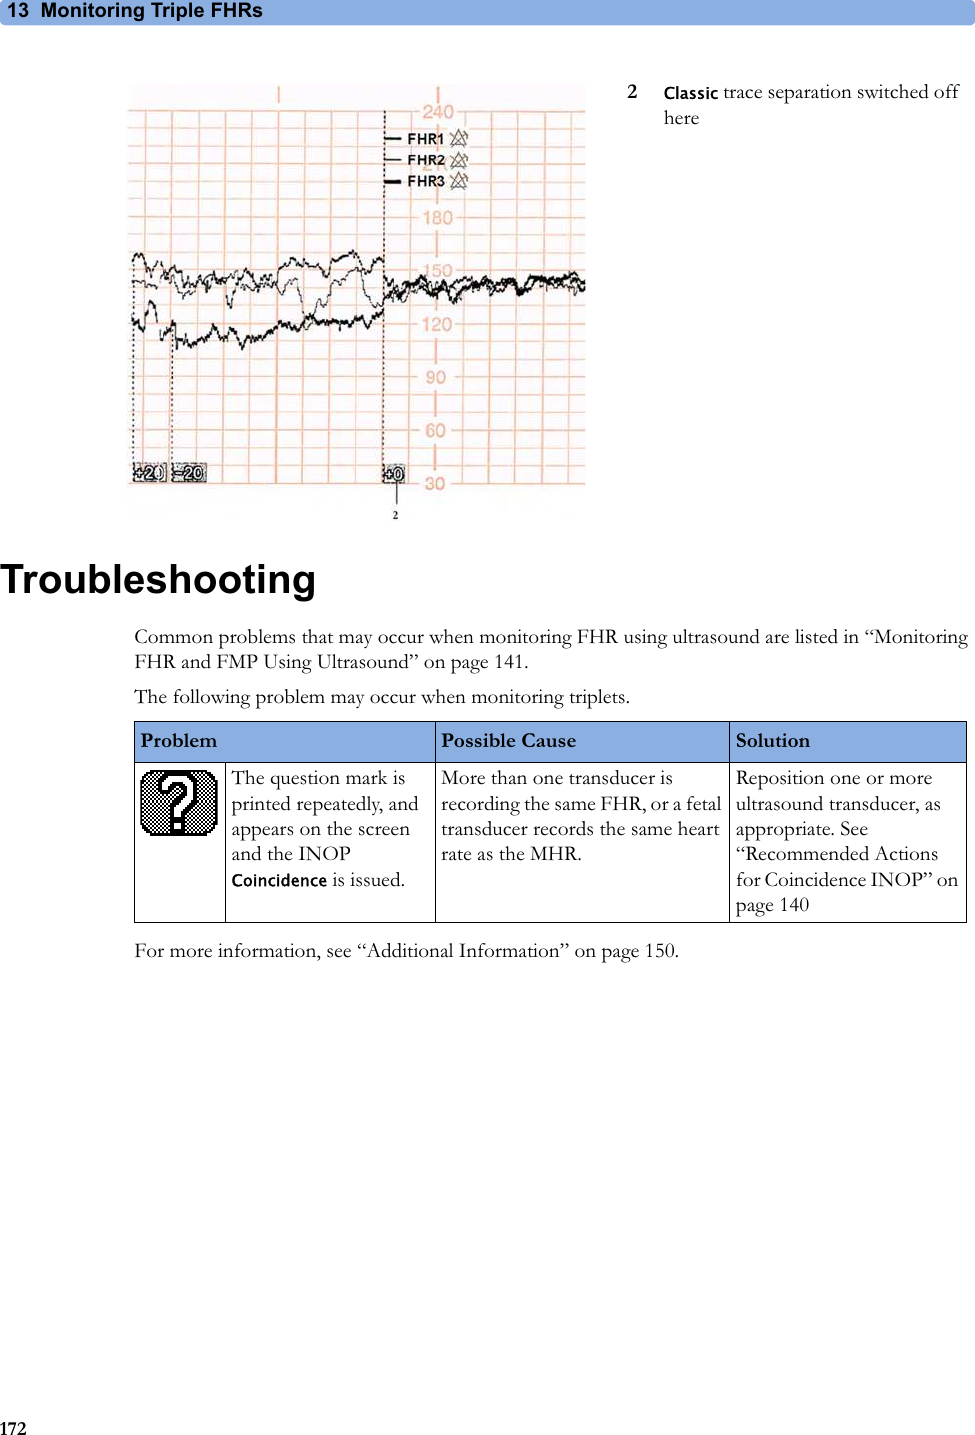 13  Monitoring Triple FHRs172TroubleshootingCommon problems that may occur when monitoring FHR using ultrasound are listed in “Monitoring FHR and FMP Using Ultrasound” on page 141.The following problem may occur when monitoring triplets.For more information, see “Additional Information” on page 150.2Classic trace separation switched off hereProblem Possible Cause Solution The question mark is printed repeatedly, and appears on the screen and the INOP Coincidence is issued.More than one transducer is recording the same FHR, or a fetal transducer records the same heart rate as the MHR.Reposition one or more ultrasound transducer, as appropriate. See “Recommended Actions for Coincidence INOP” on page 140